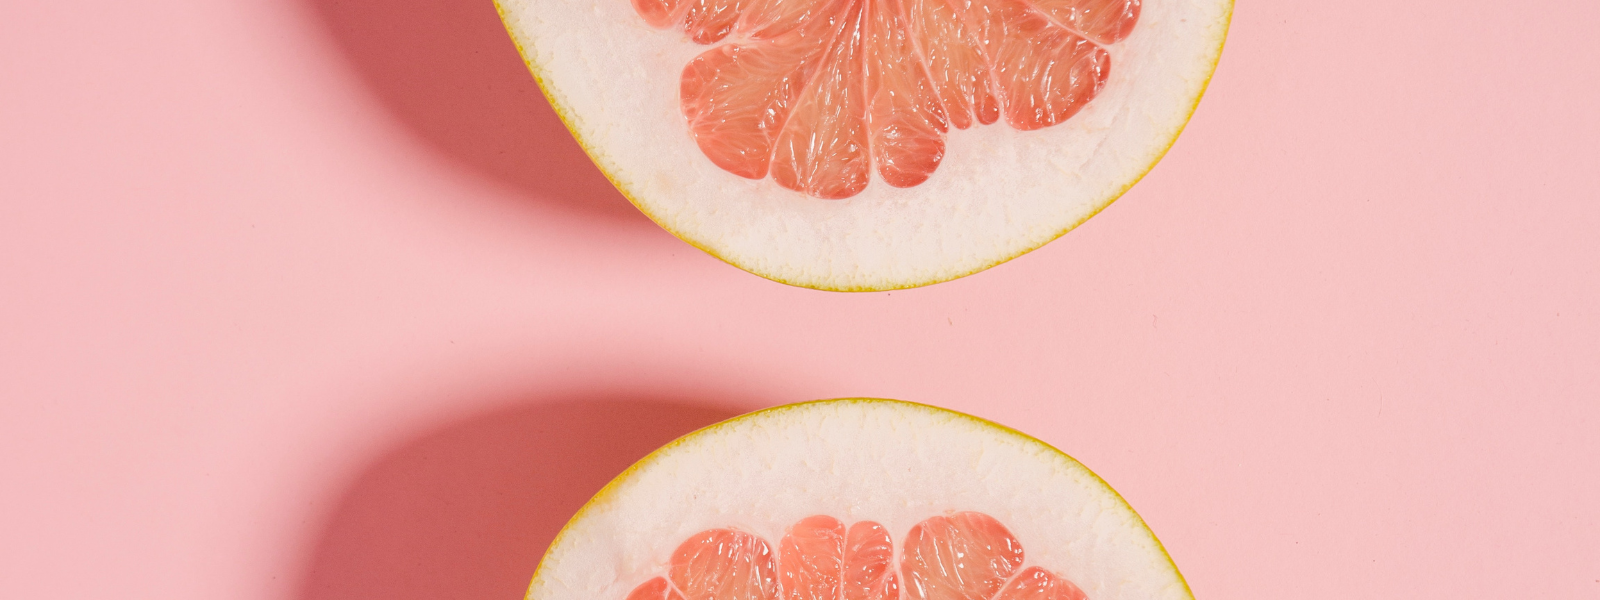 How Do Liquid Collagen and Vitamin C Work Together?